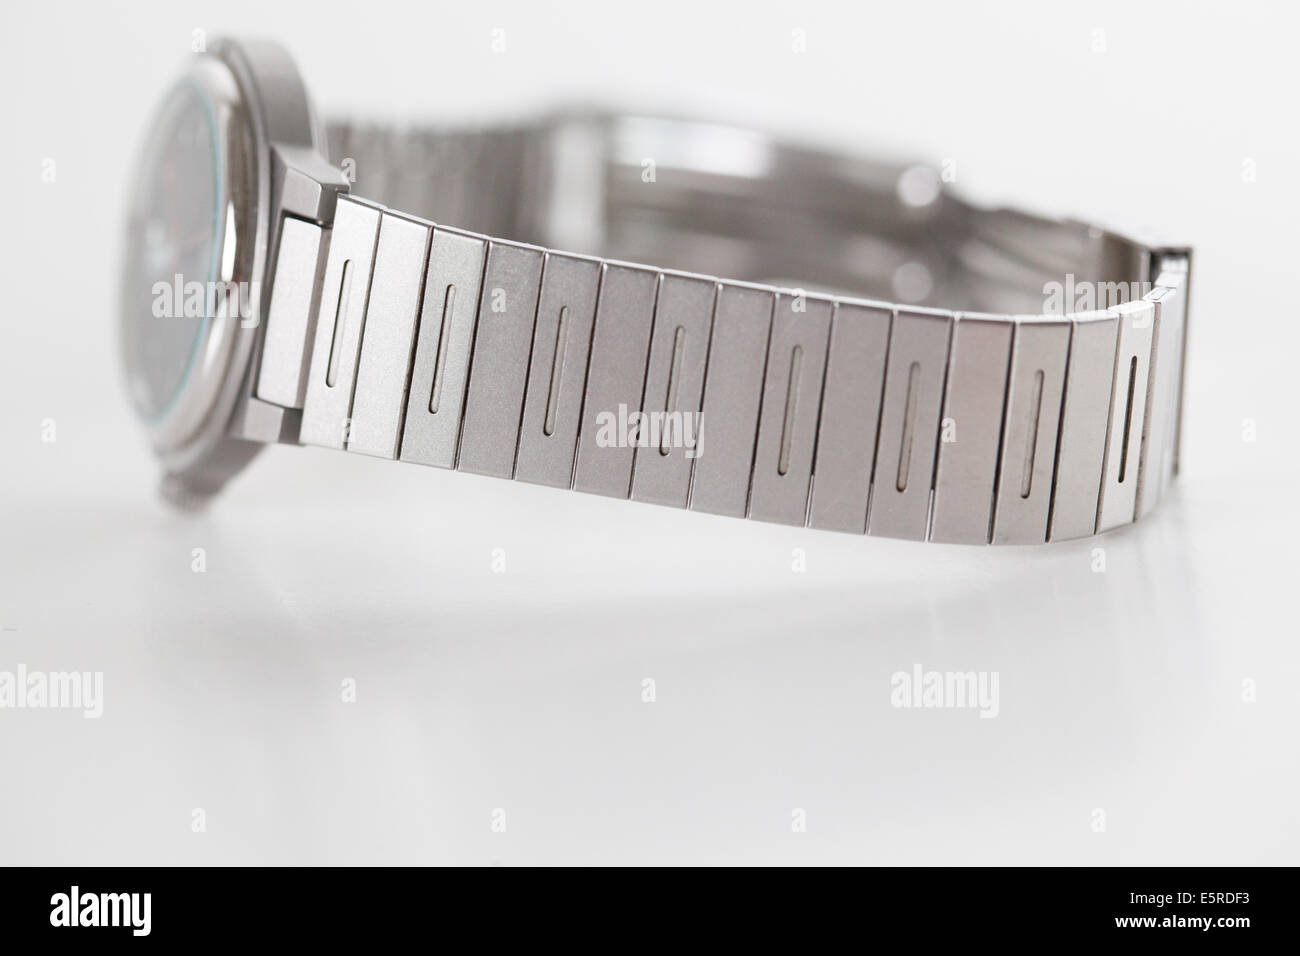 stainless steel watch wrist band Stock Photo